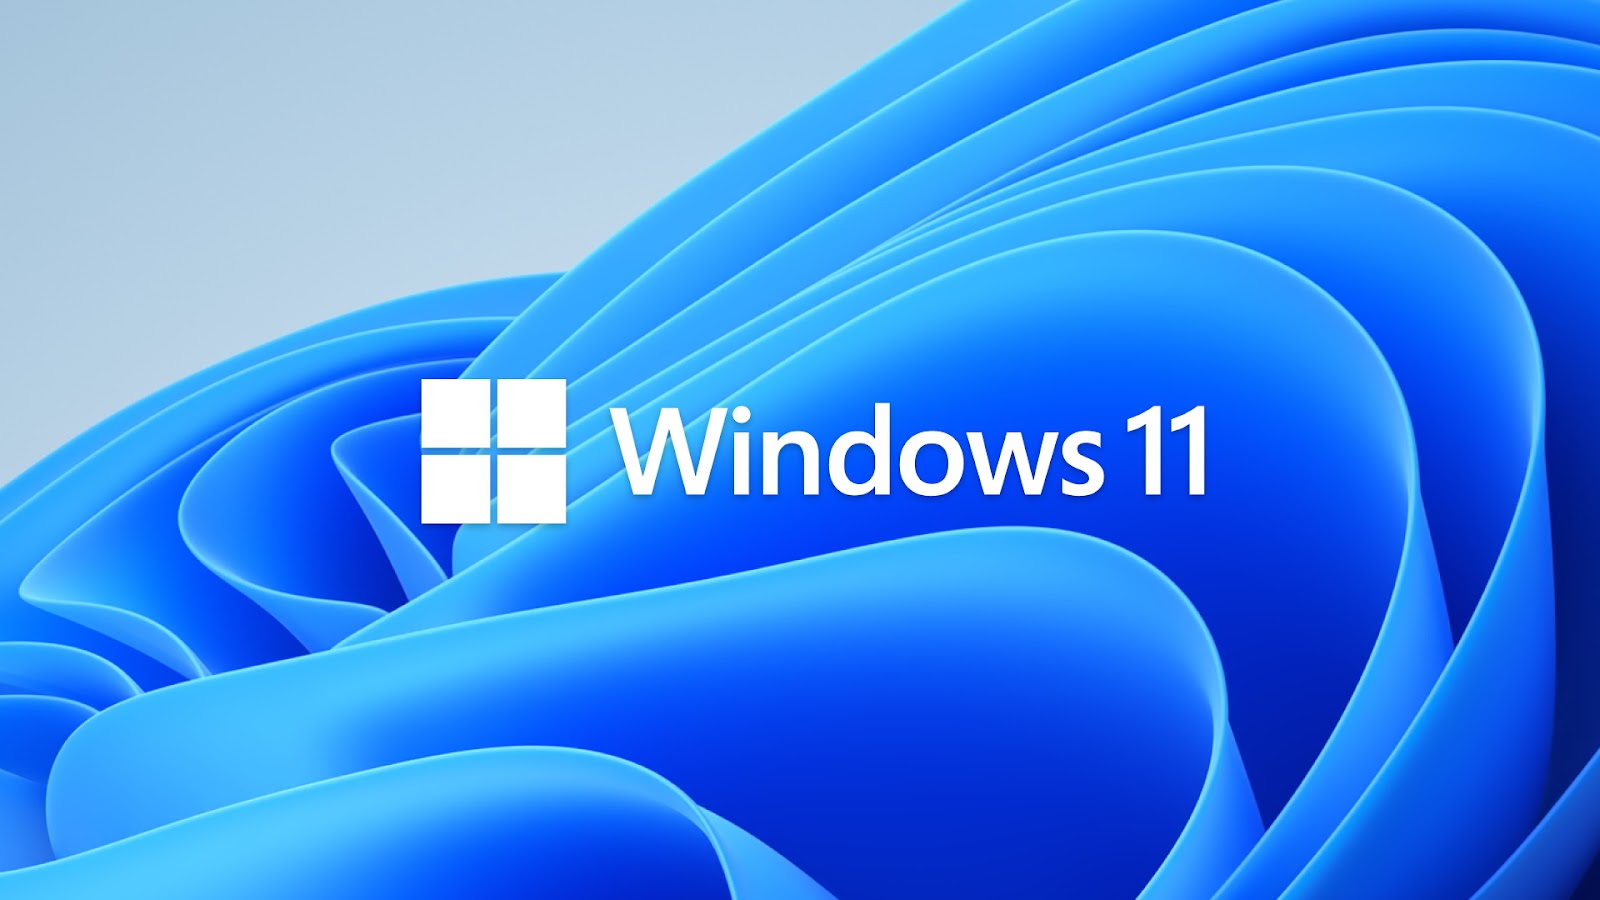 Windows 11 Released: Features, and System Requirements